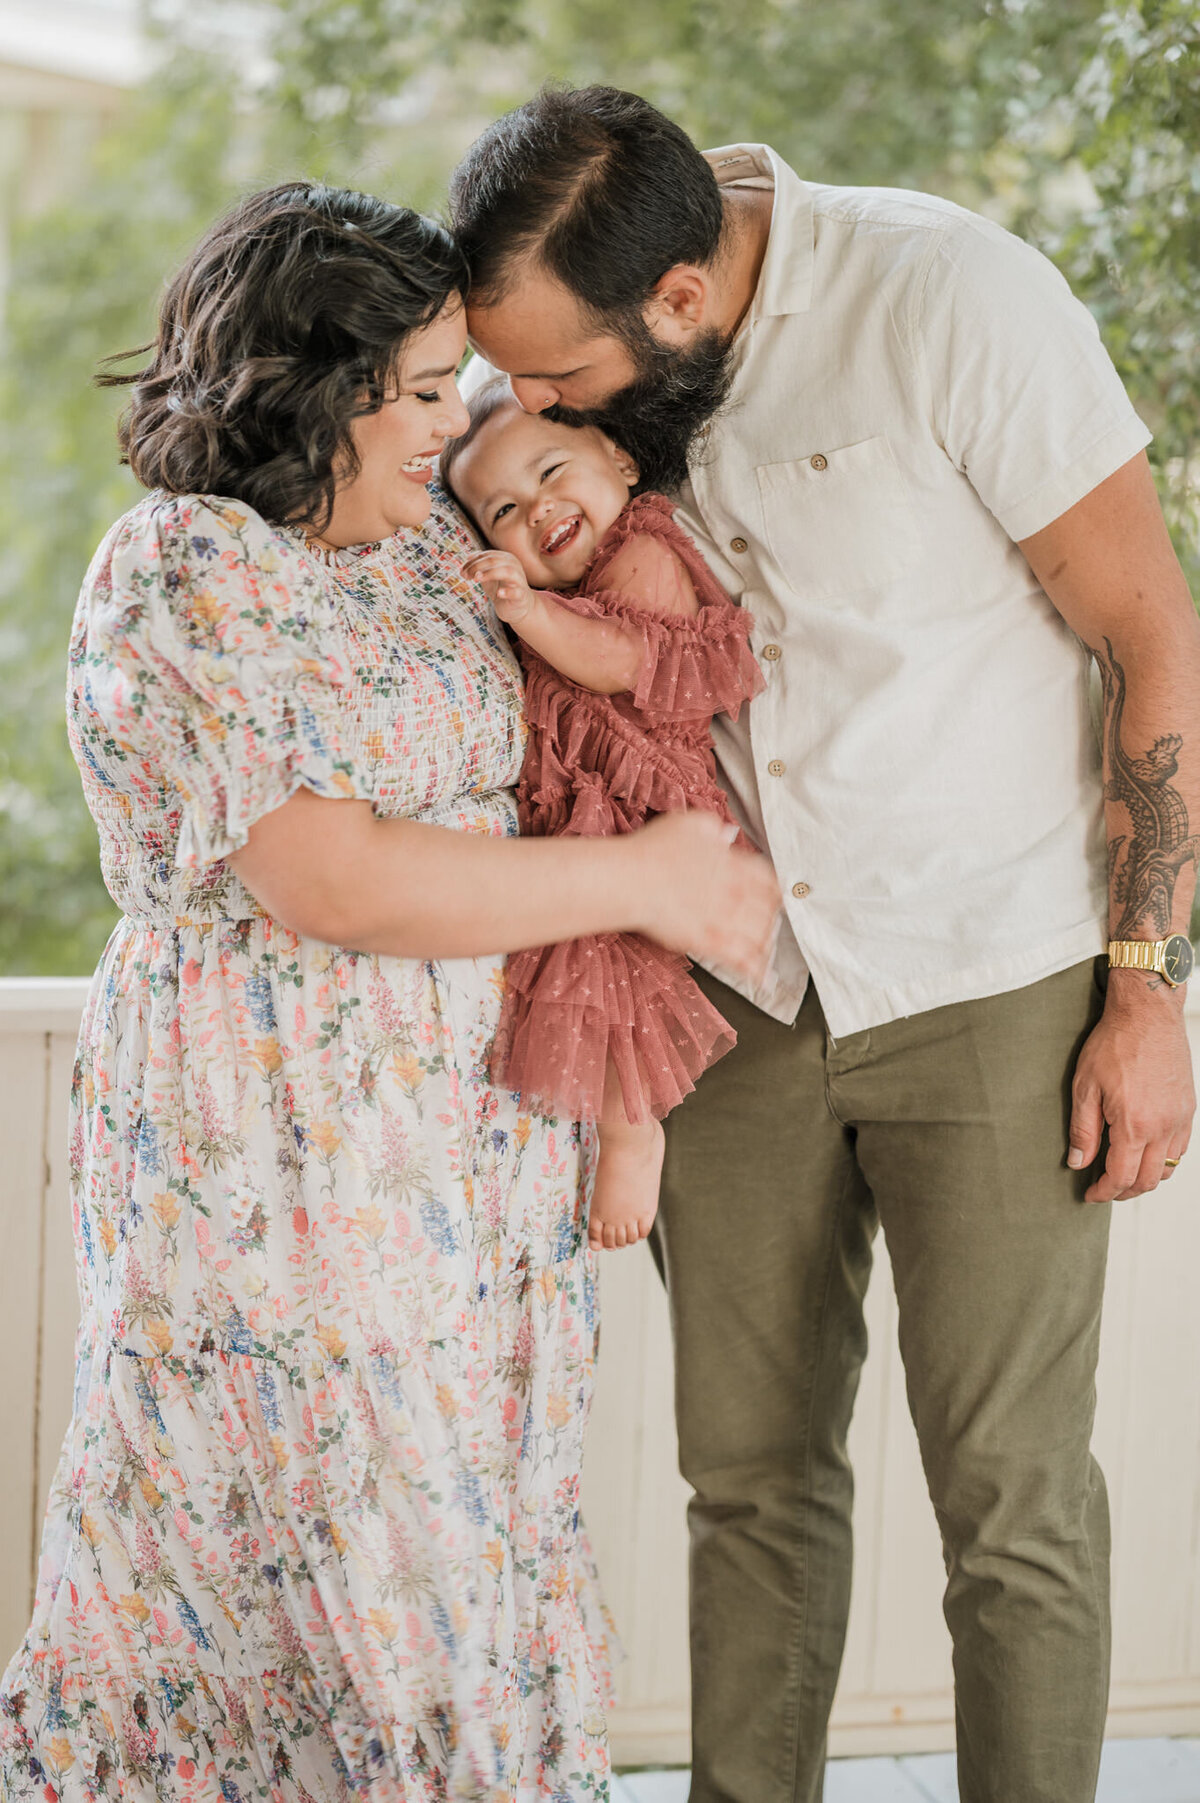 Mom and dad smile and kiss their laughing daughter during family pictures.